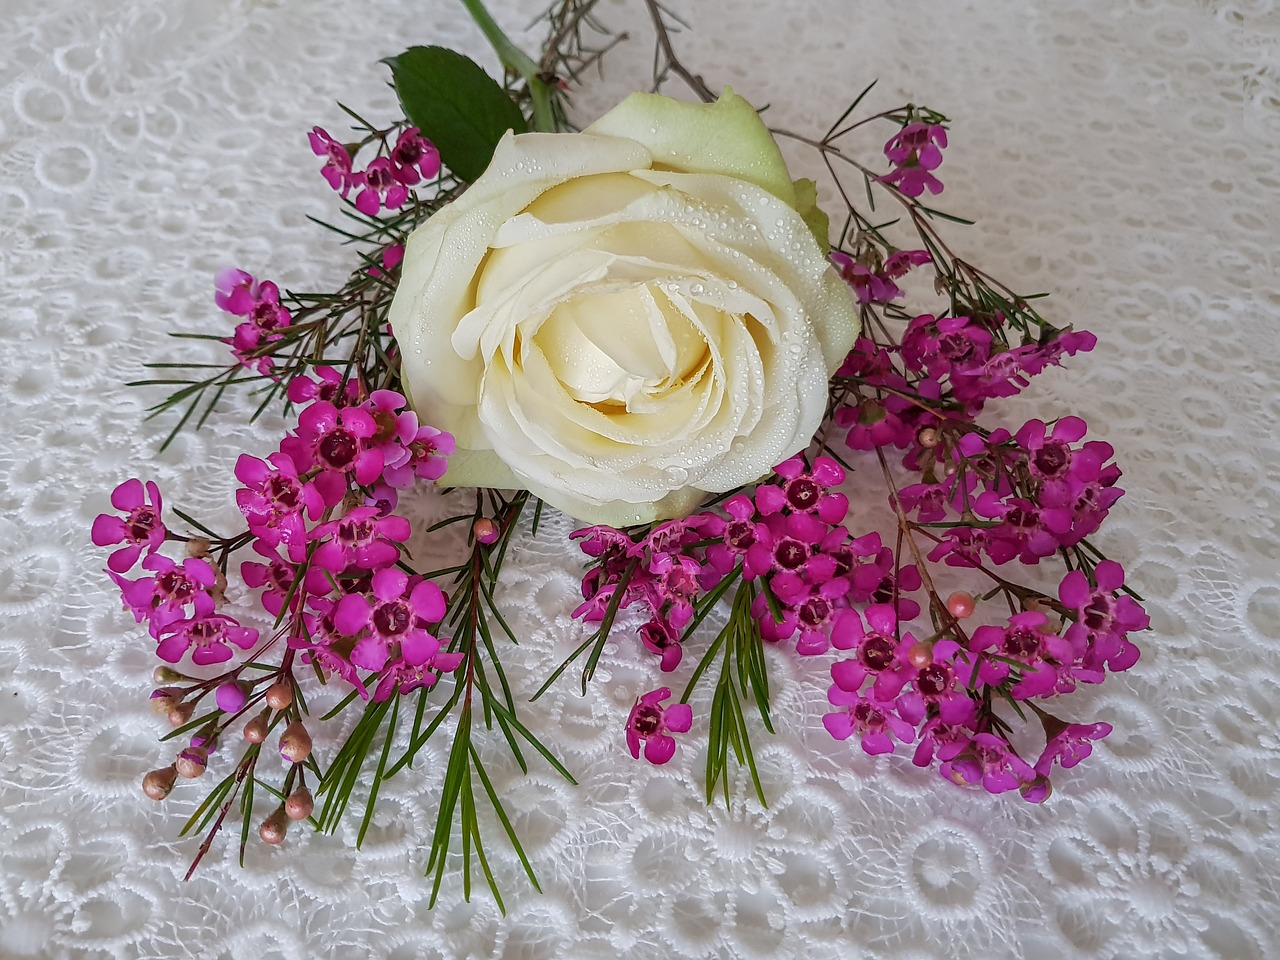 rose white waxflower pink noble free photo